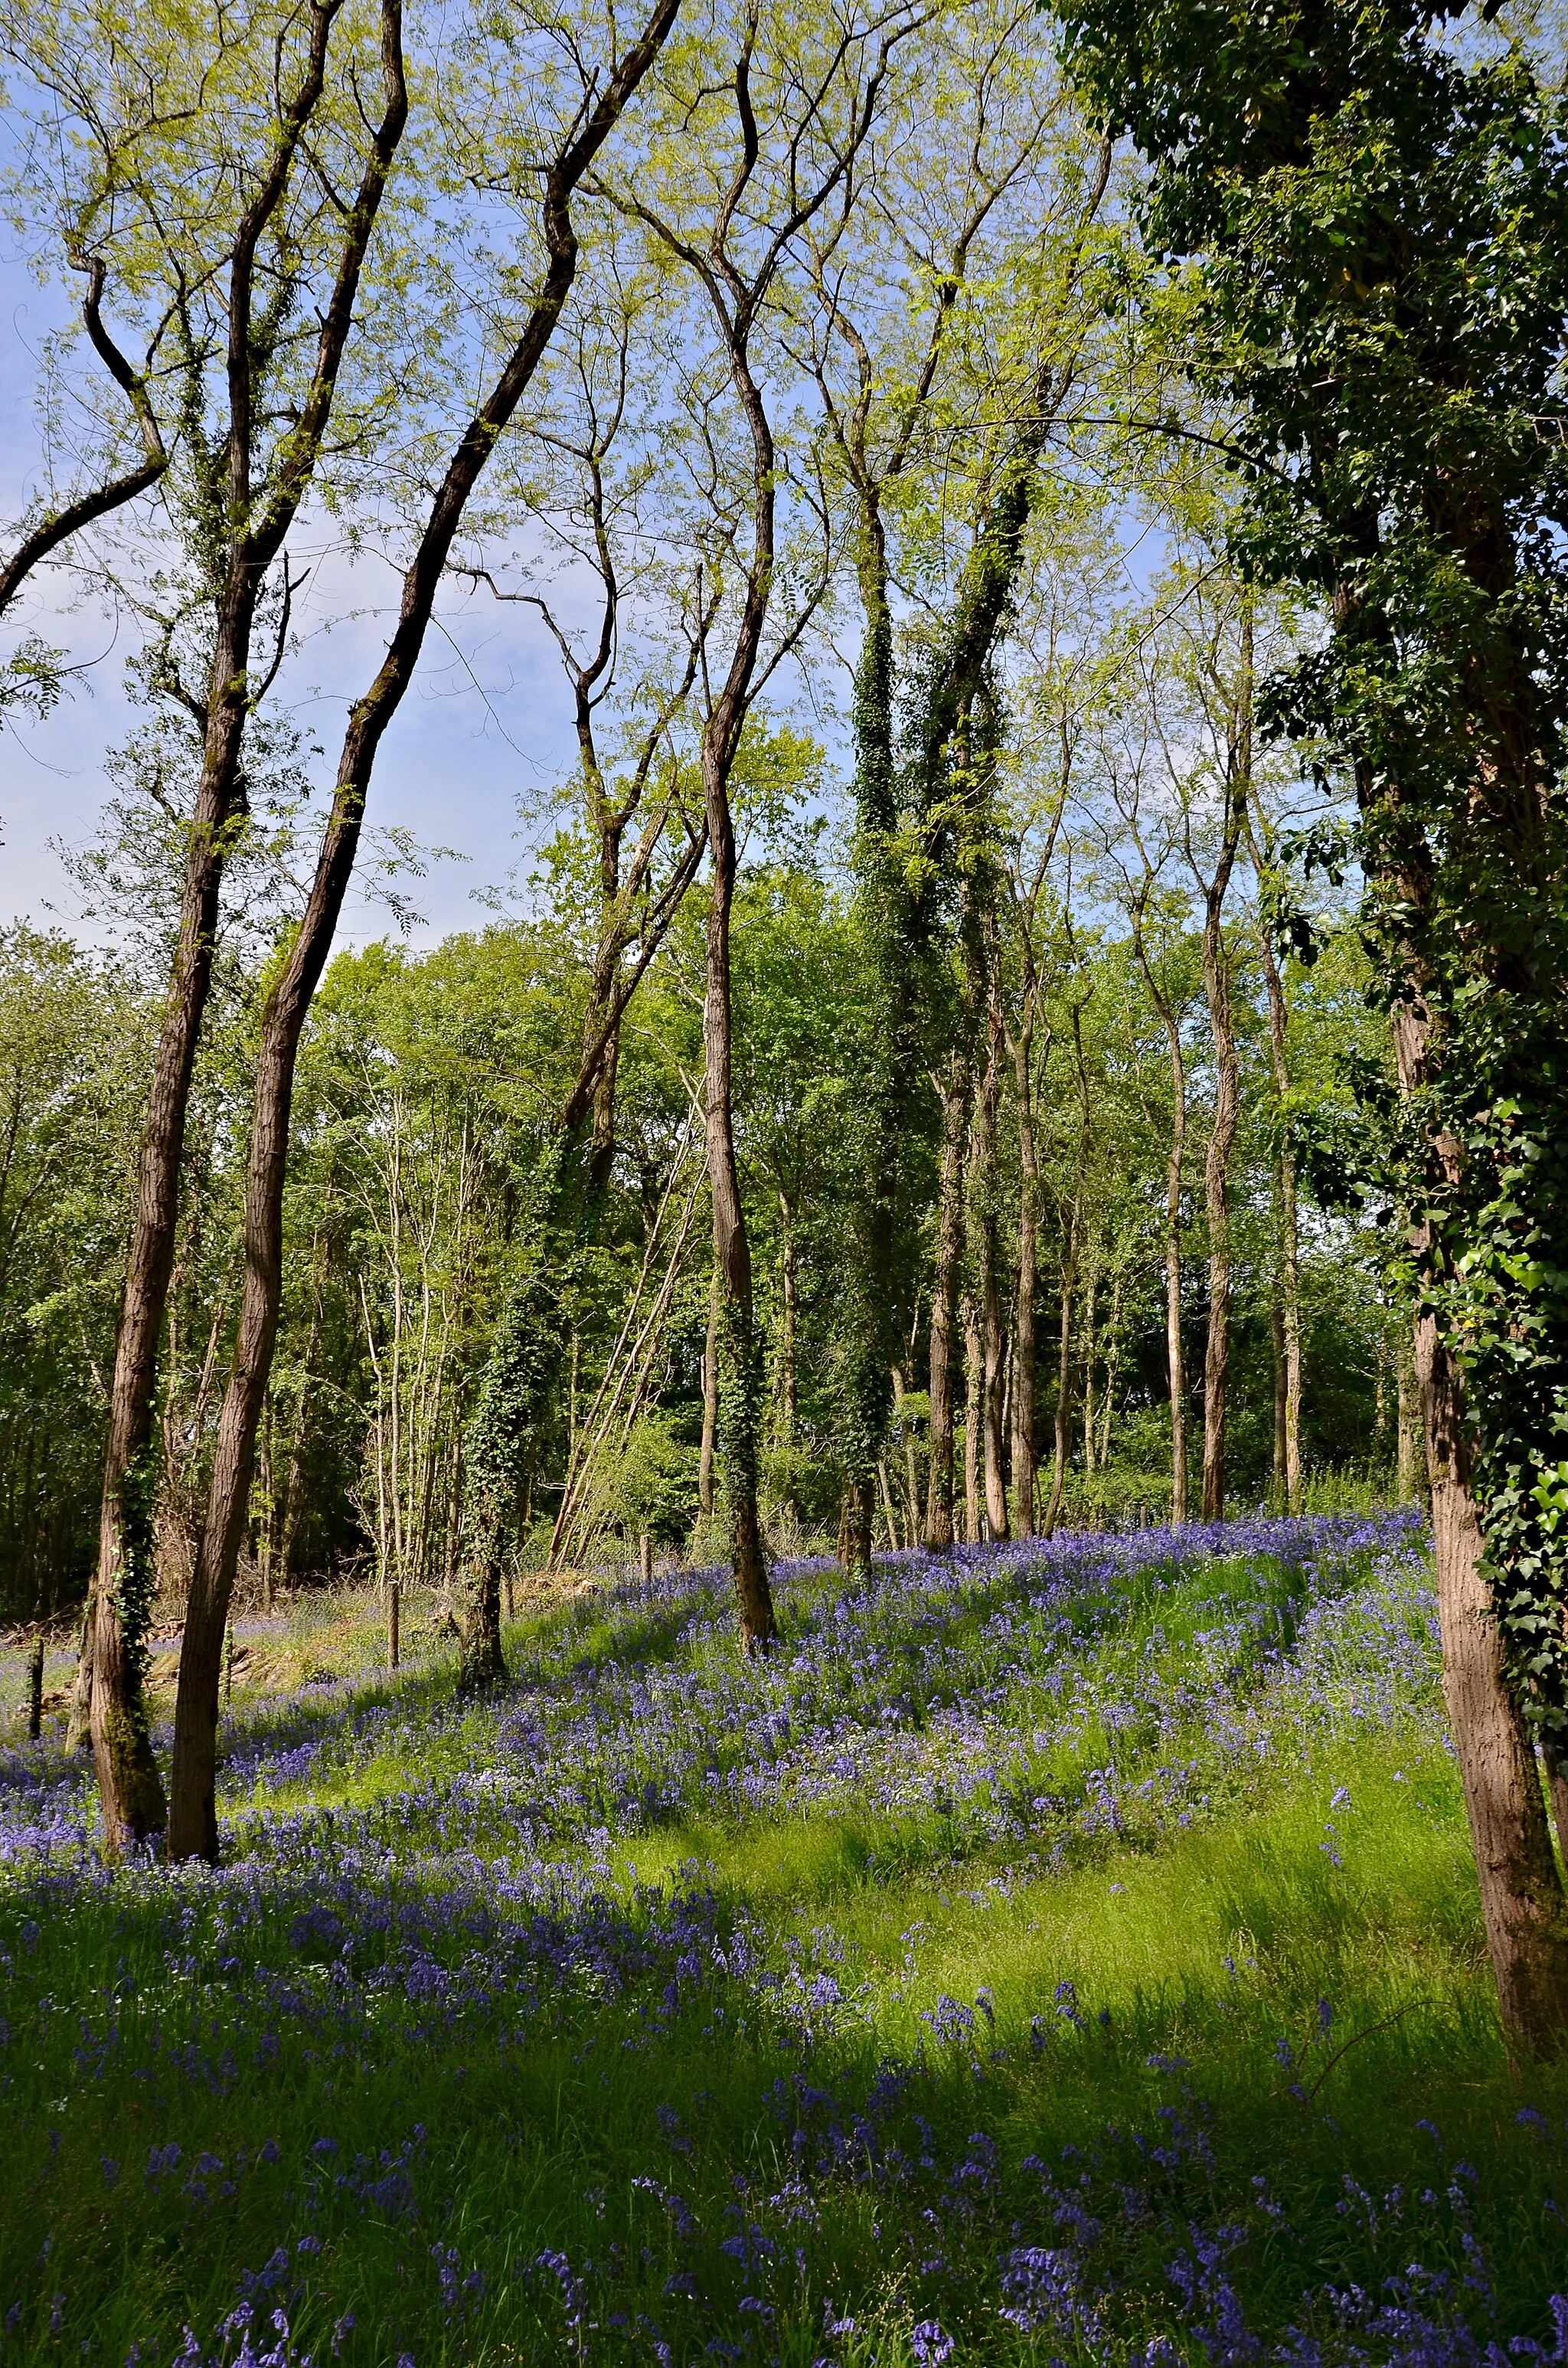 Photo showing: Undergrowth with common bluebells, near road D 4, Saint-Romain, Vienne, France.